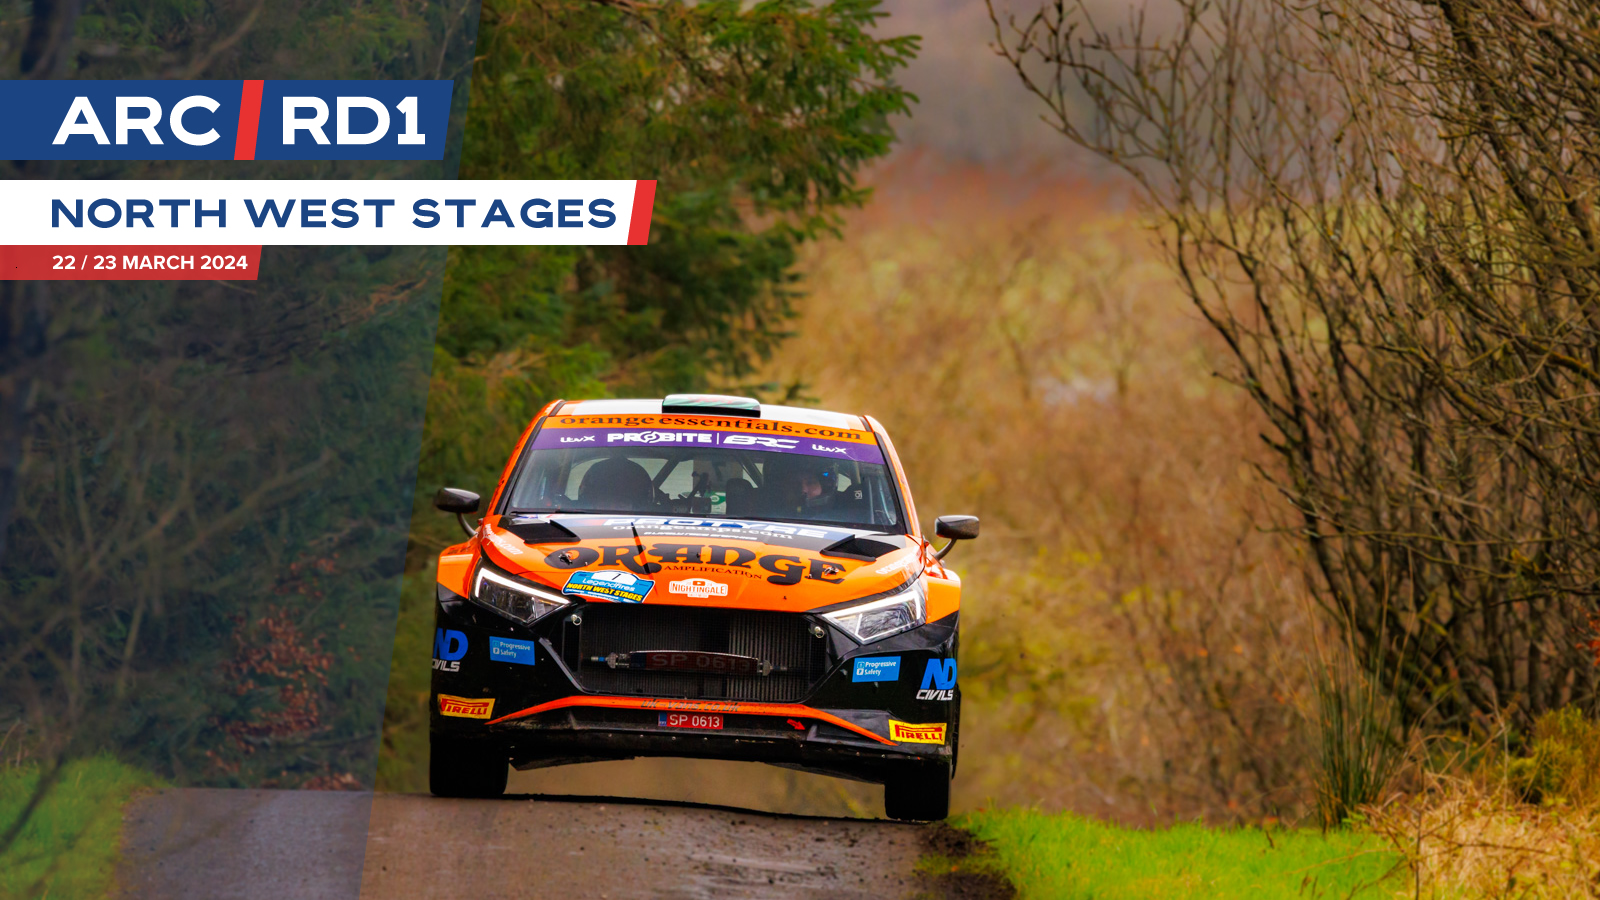 PRO TYRES ASPHALT RALLY CHAMPIONSHIP 2024 / ROUND 1 / LEGEND FIRES NORTH WEST STAGES RALLY 2024